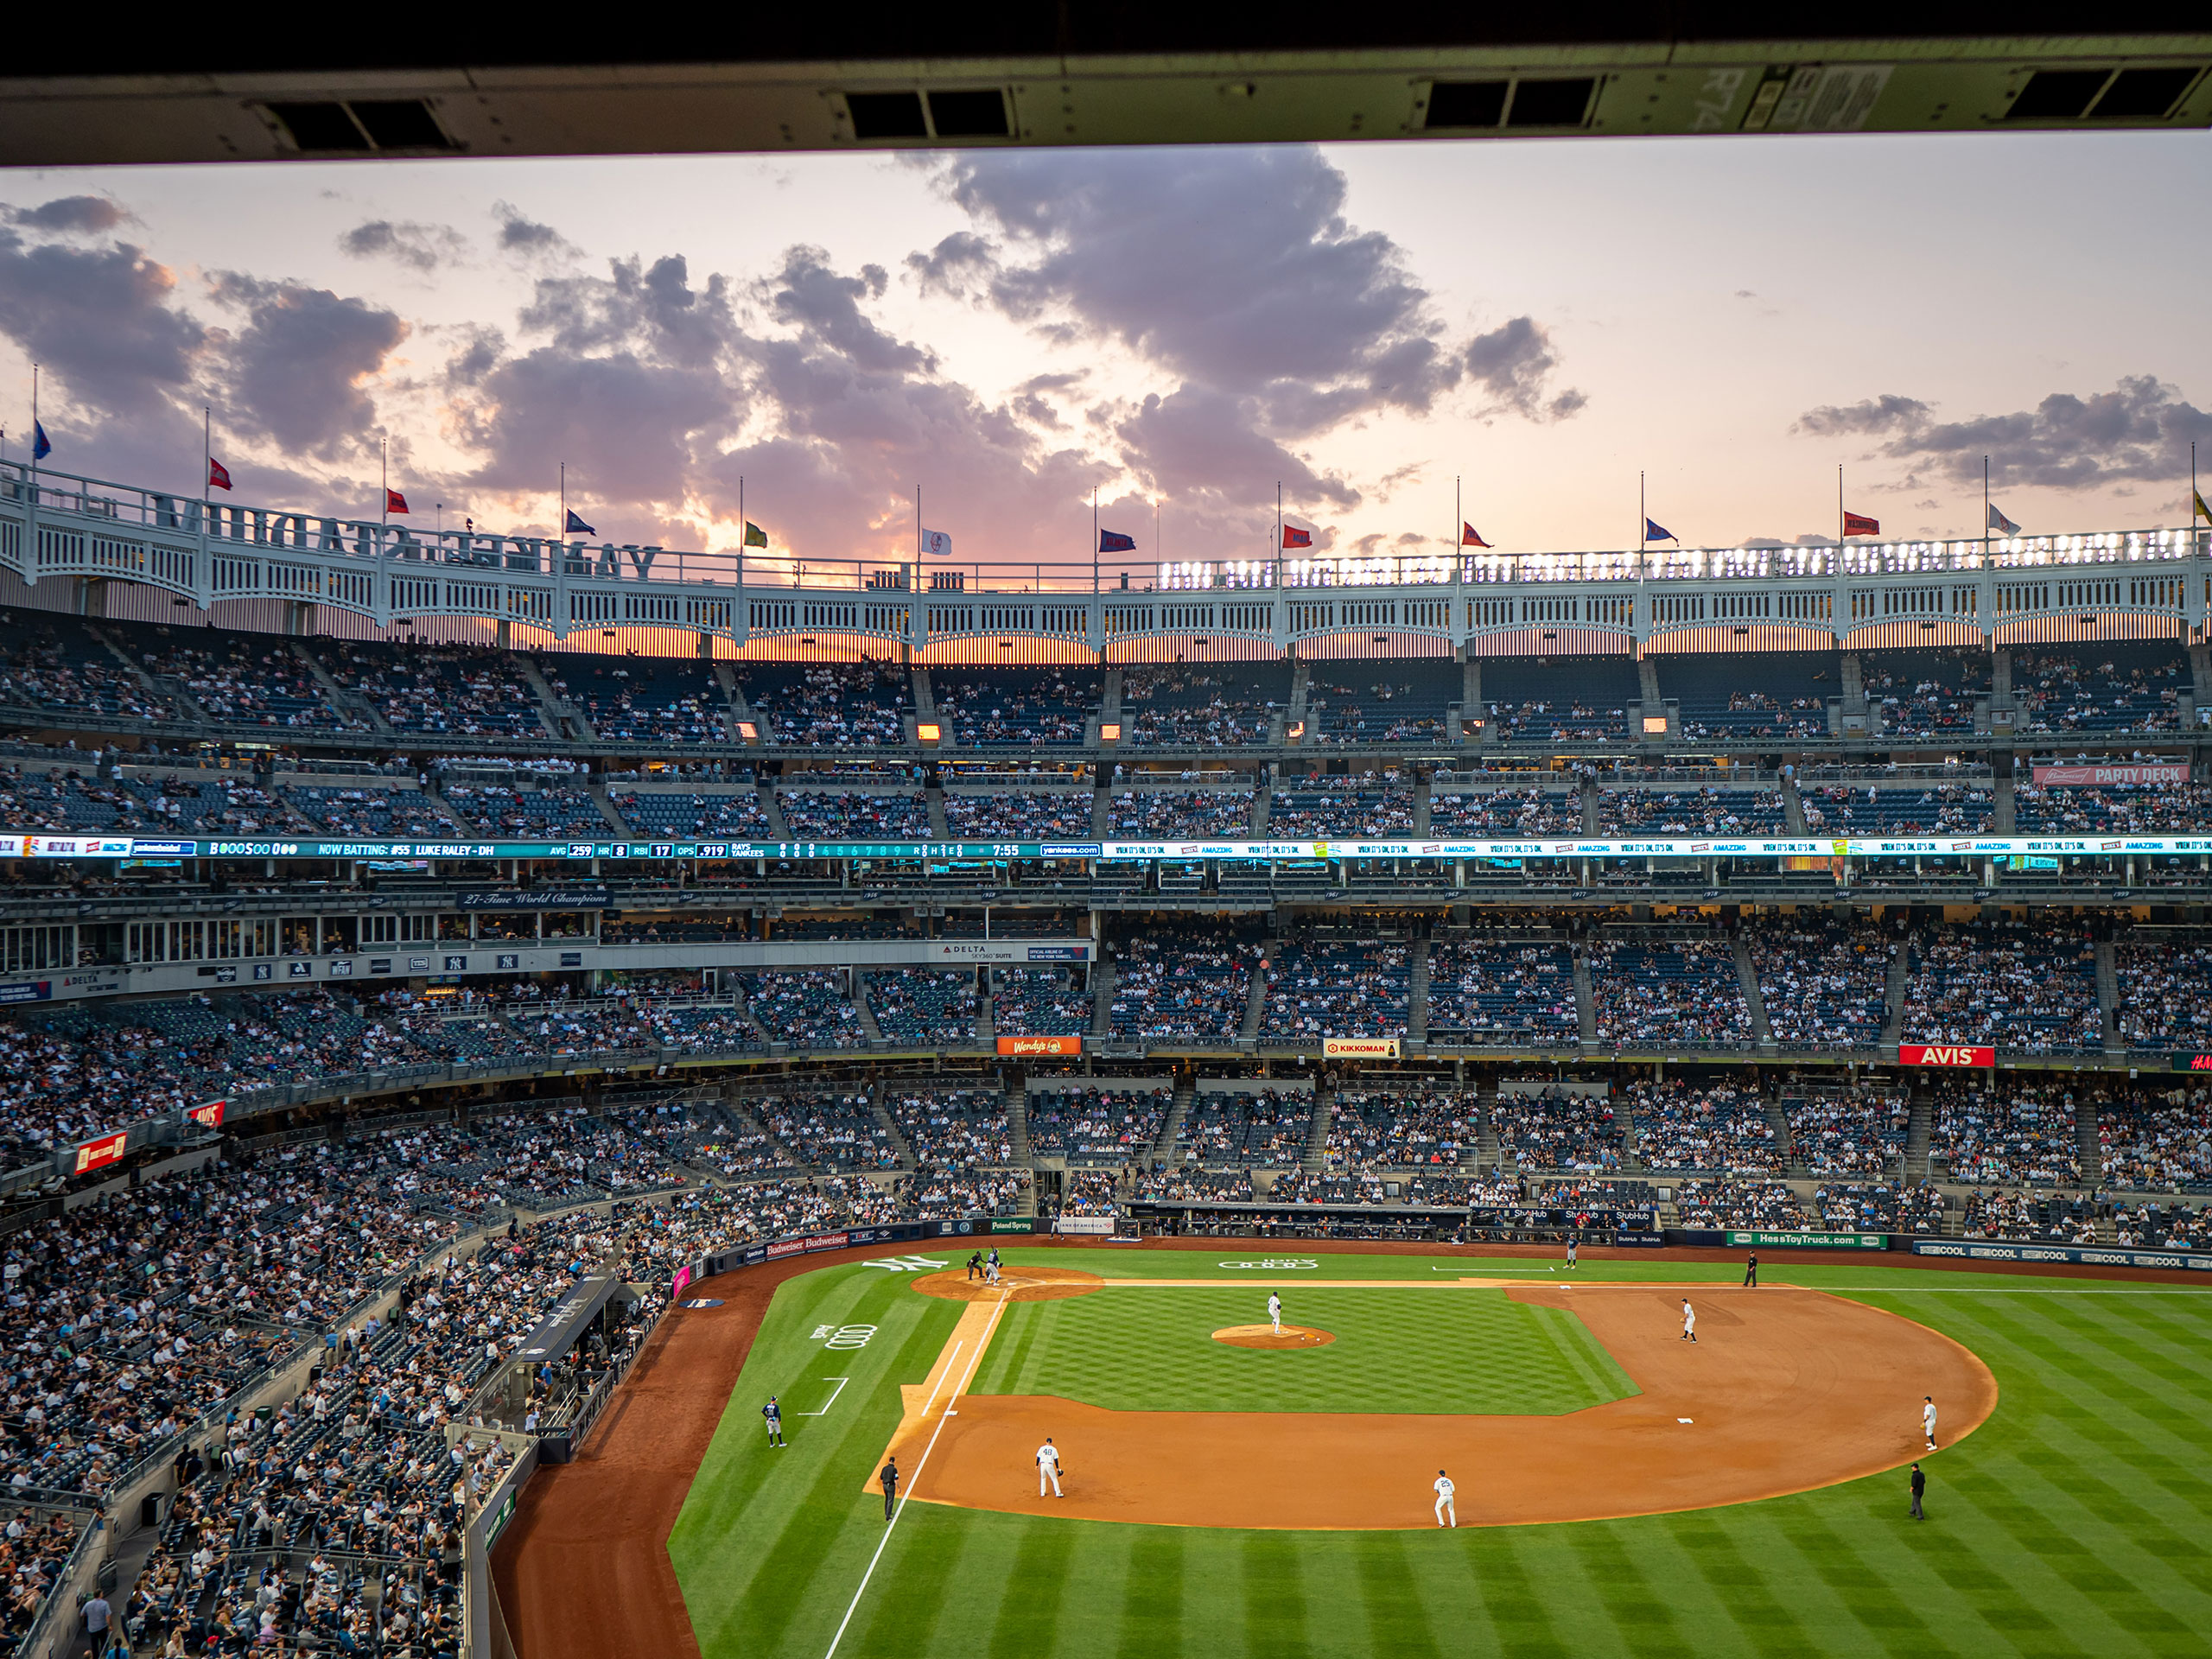 A view of a baseball stadium from box seat level: green field with players in position, a full stadium and a pink and purple sky.